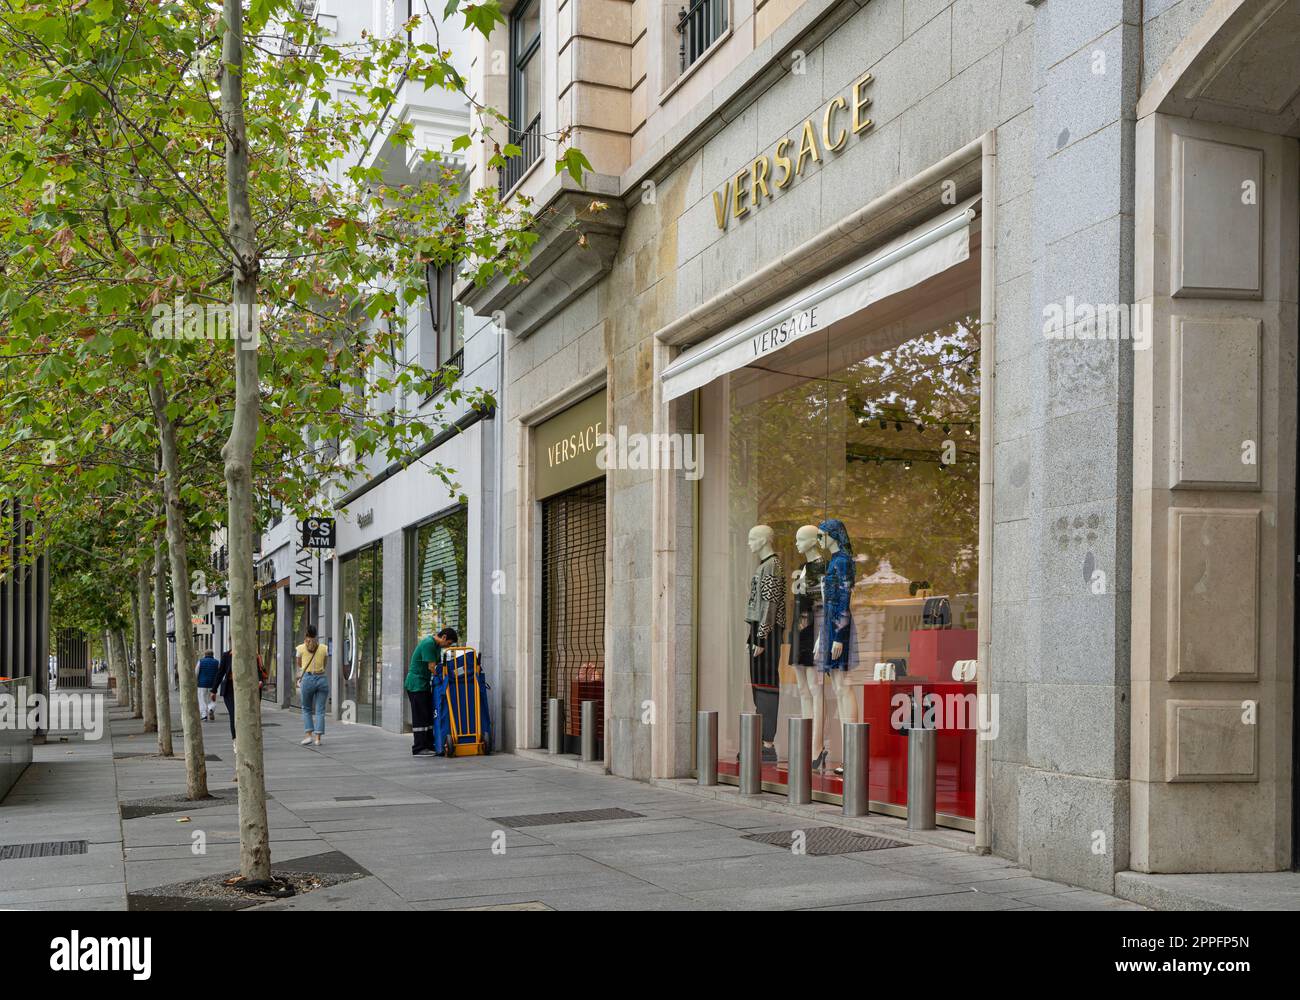 Versace fashion outlet hi-res stock photography and images - Alamy